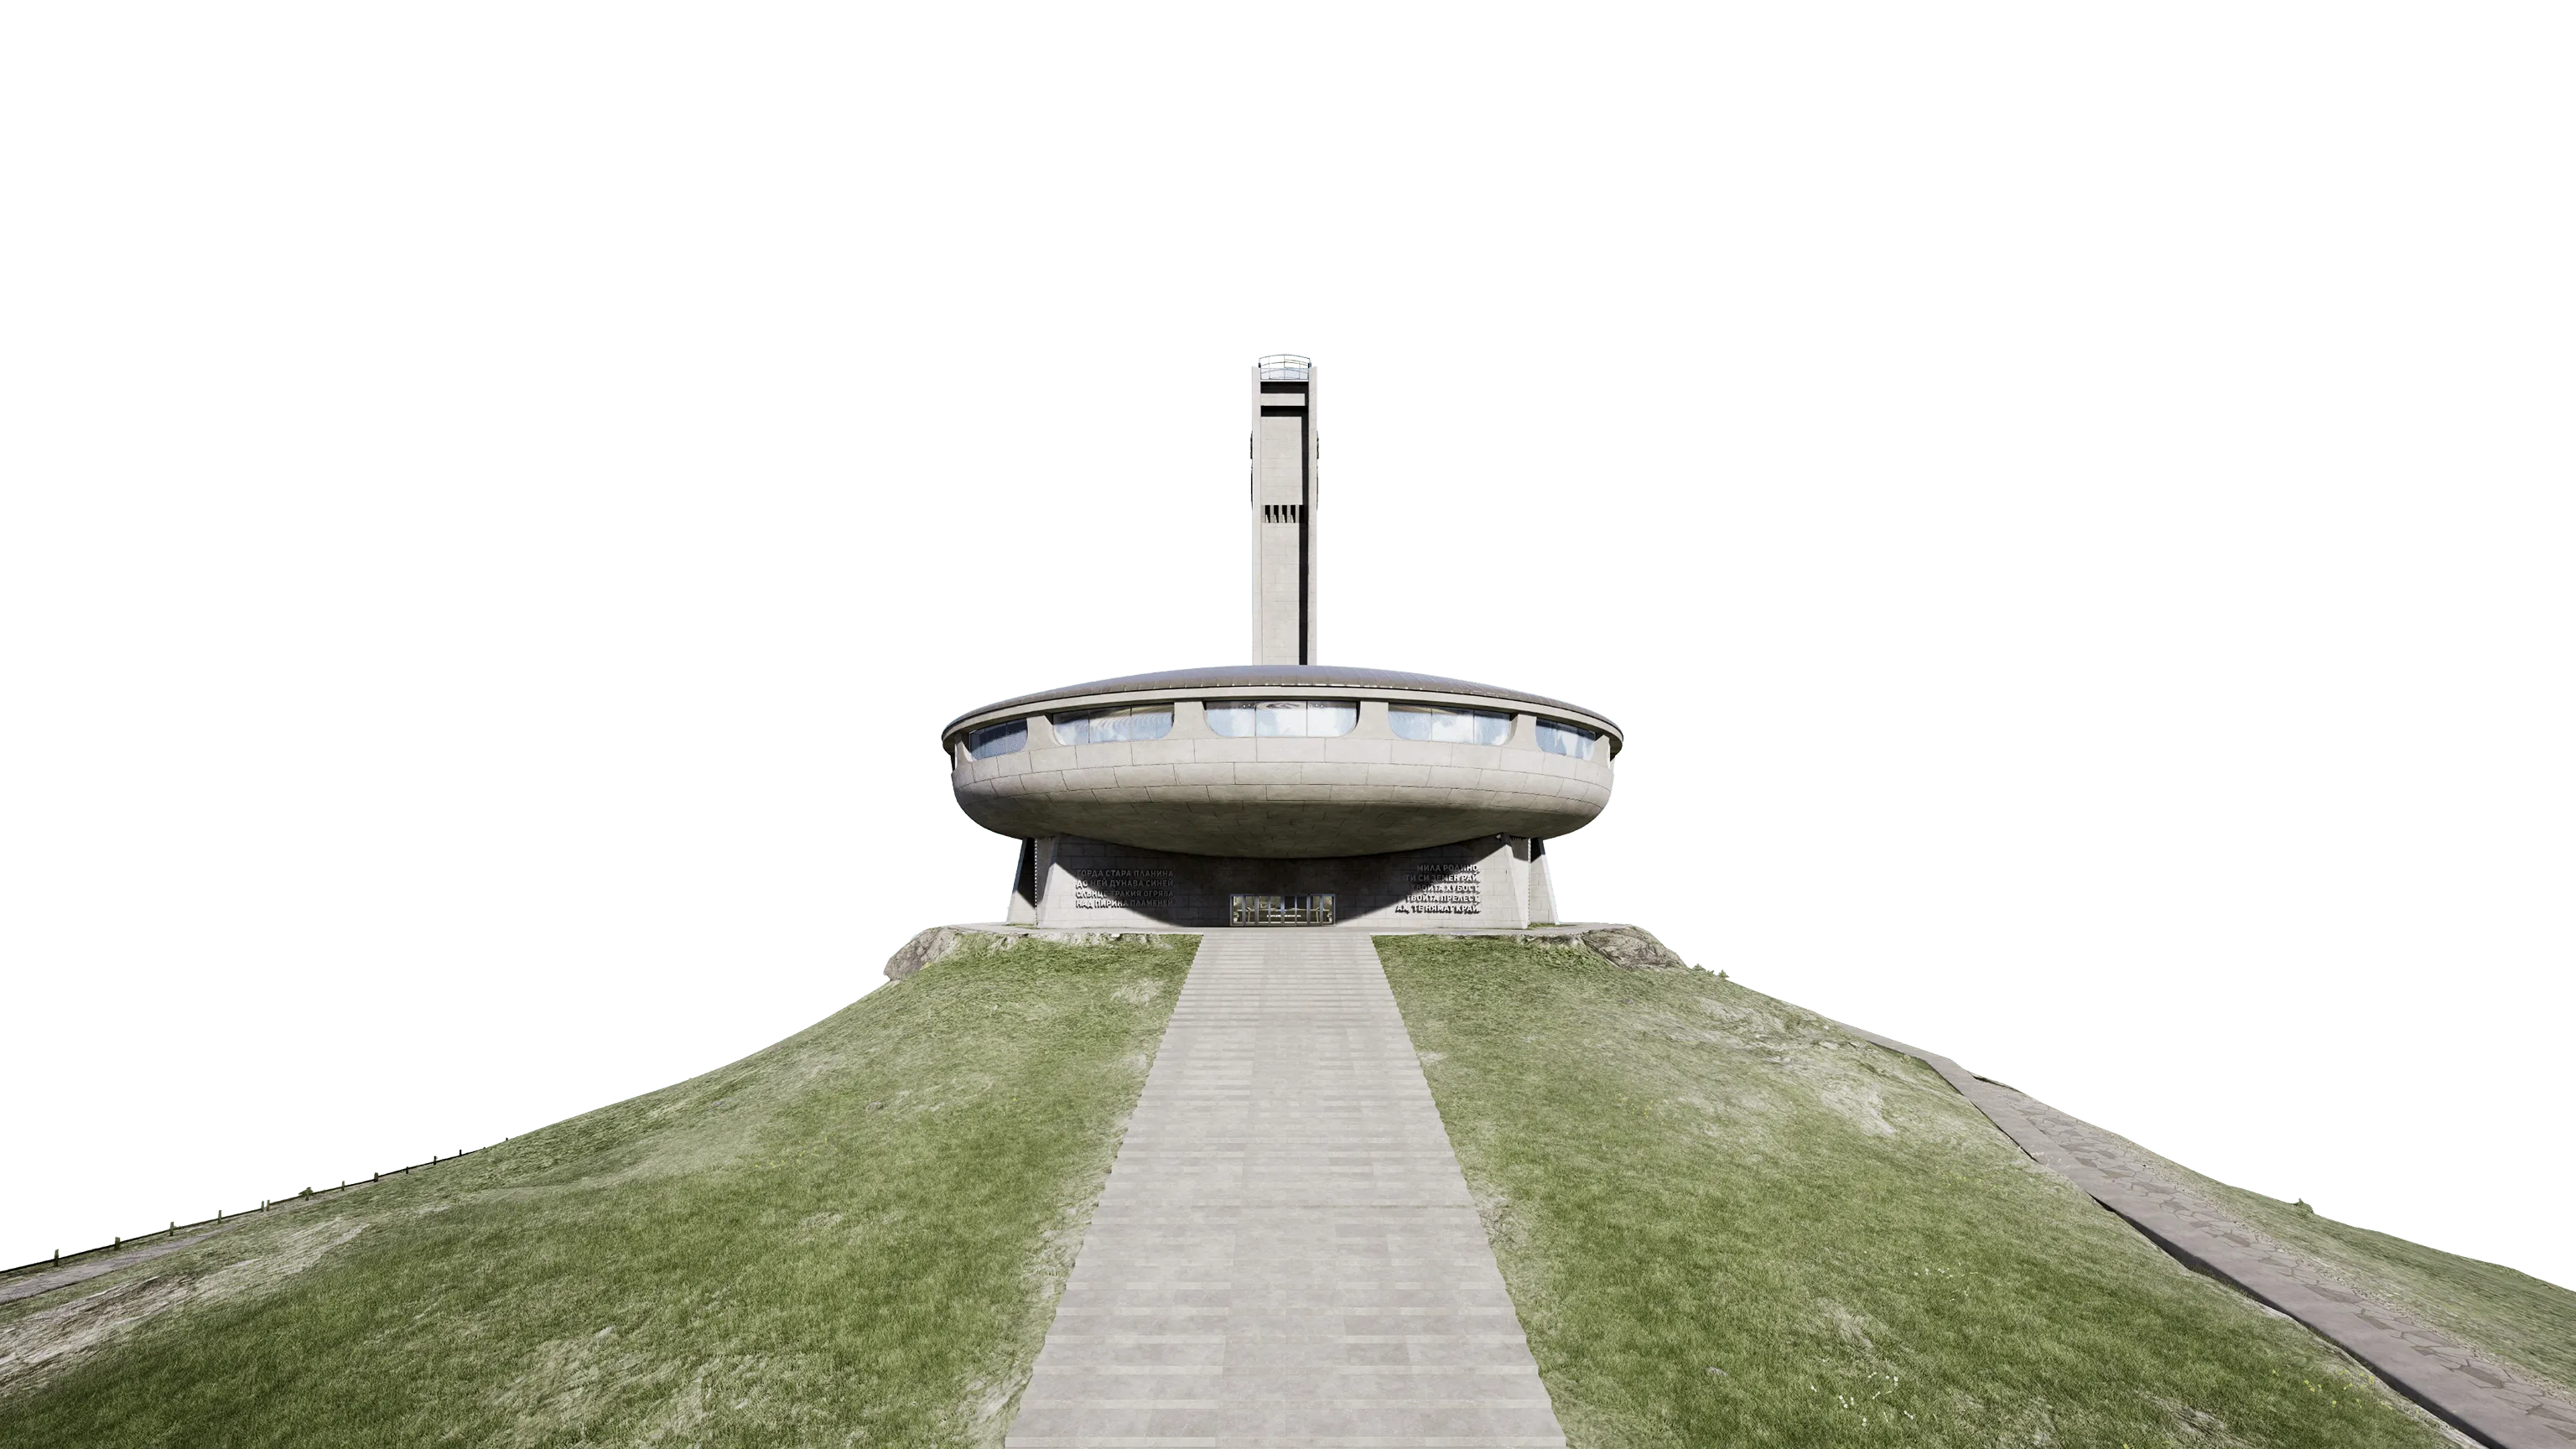 A CG image of the Buzludzha Monument in Bulgaria, on a dark background, with the monument's distinctive saucer-shaped building and tall tower sitting atop a grassy hill with a pathway leading up to it.